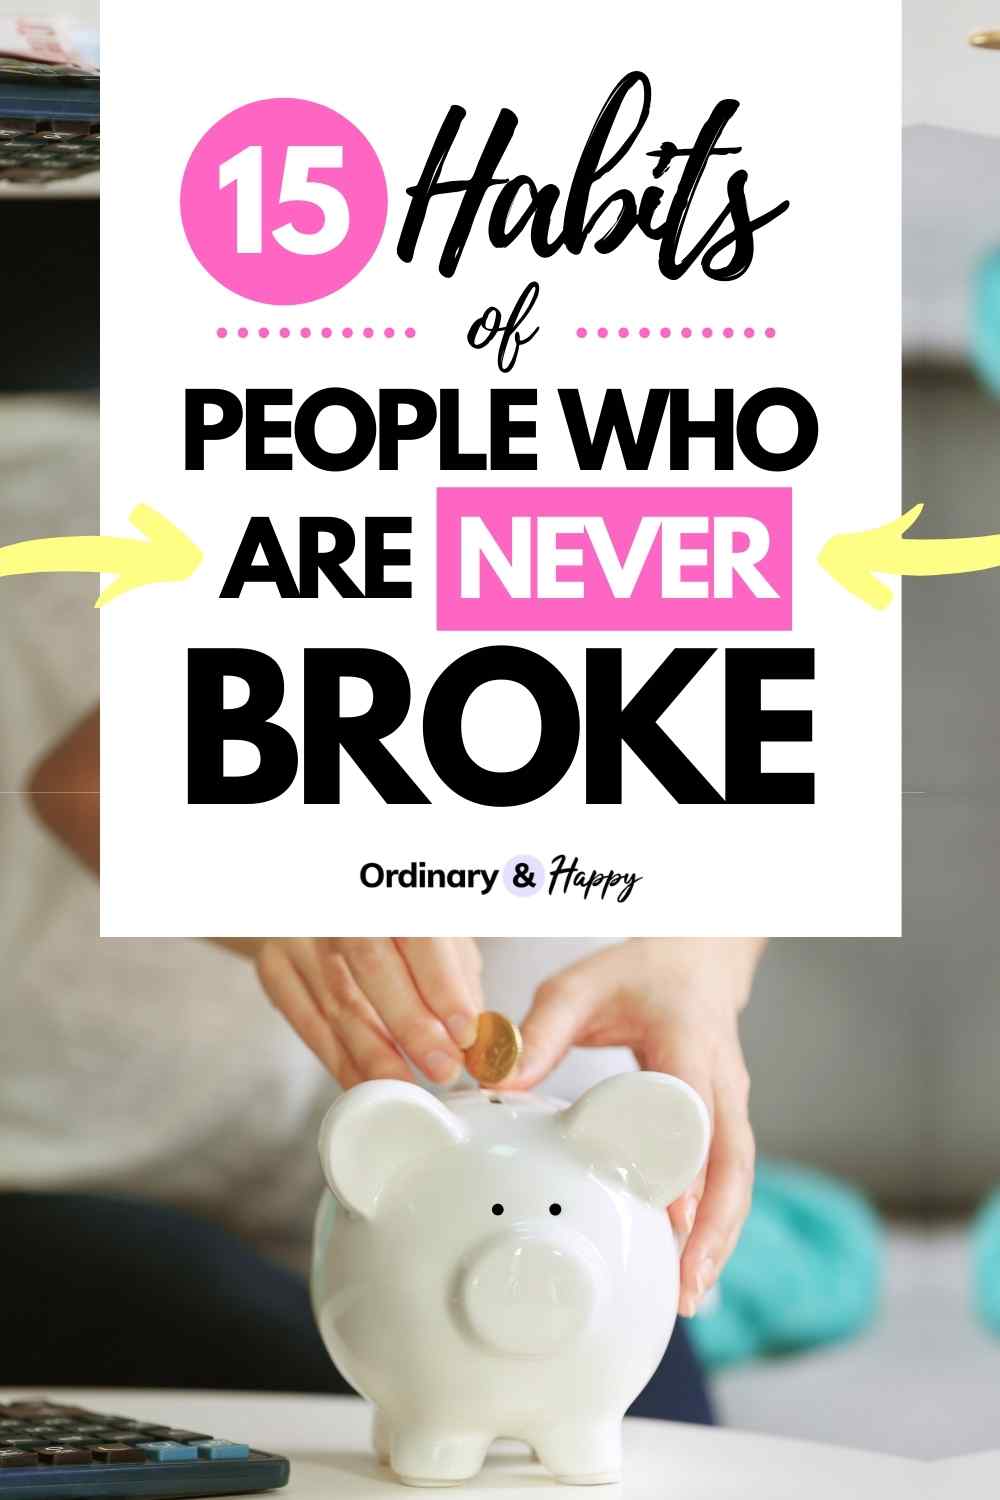 15 Habits of People Who Are Never Broke